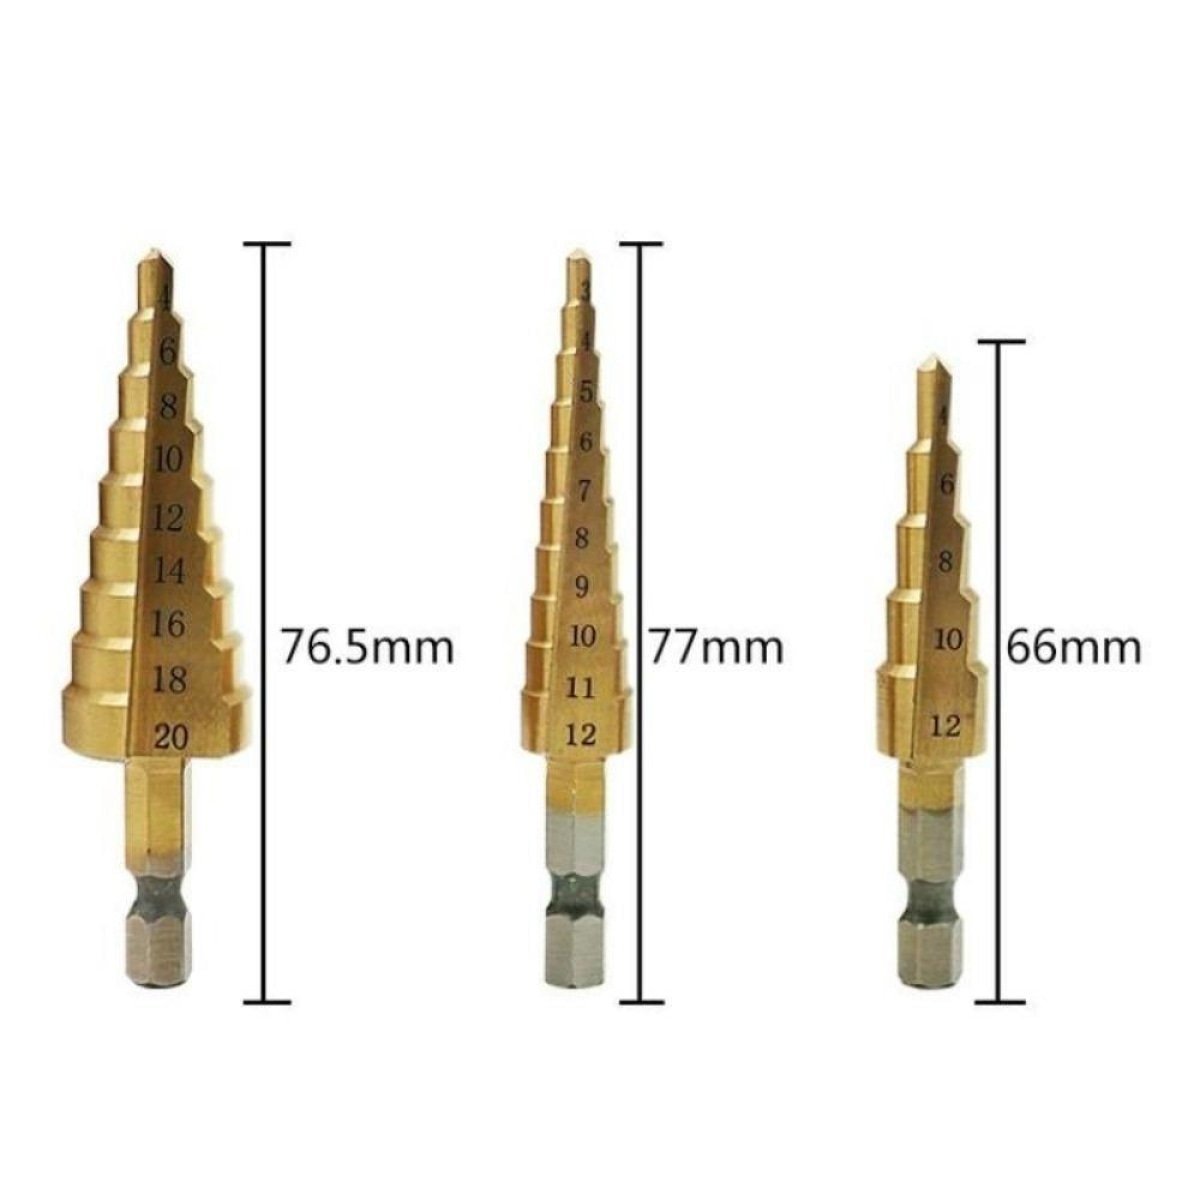 3-12mm 4-12mm 4-20mm Step Cone Drill Bit Hole Cutter Tool Hex Shank Step Shank - - Asia Sell